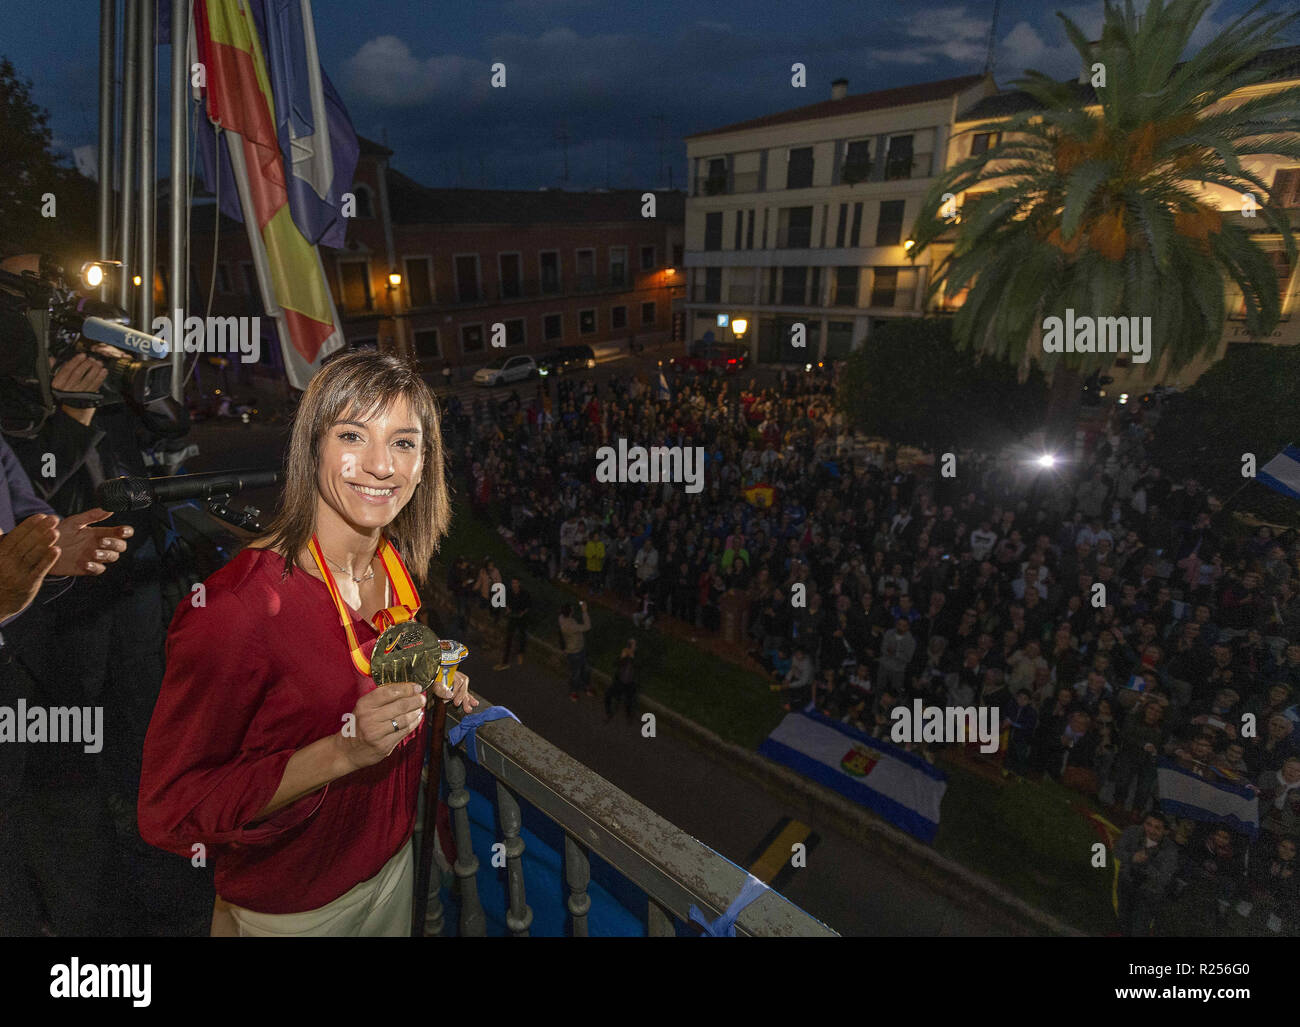 Madrid, Madrid, Spain. 16th Nov, 2018. Spanish Karateka Sandra Sanchez seen posing with her Gold medal during the celebrations at her home town in Talavera de la Reina. Credit: Manu Reino/SOPA Images/ZUMA Wire/Alamy Live News Stock Photo